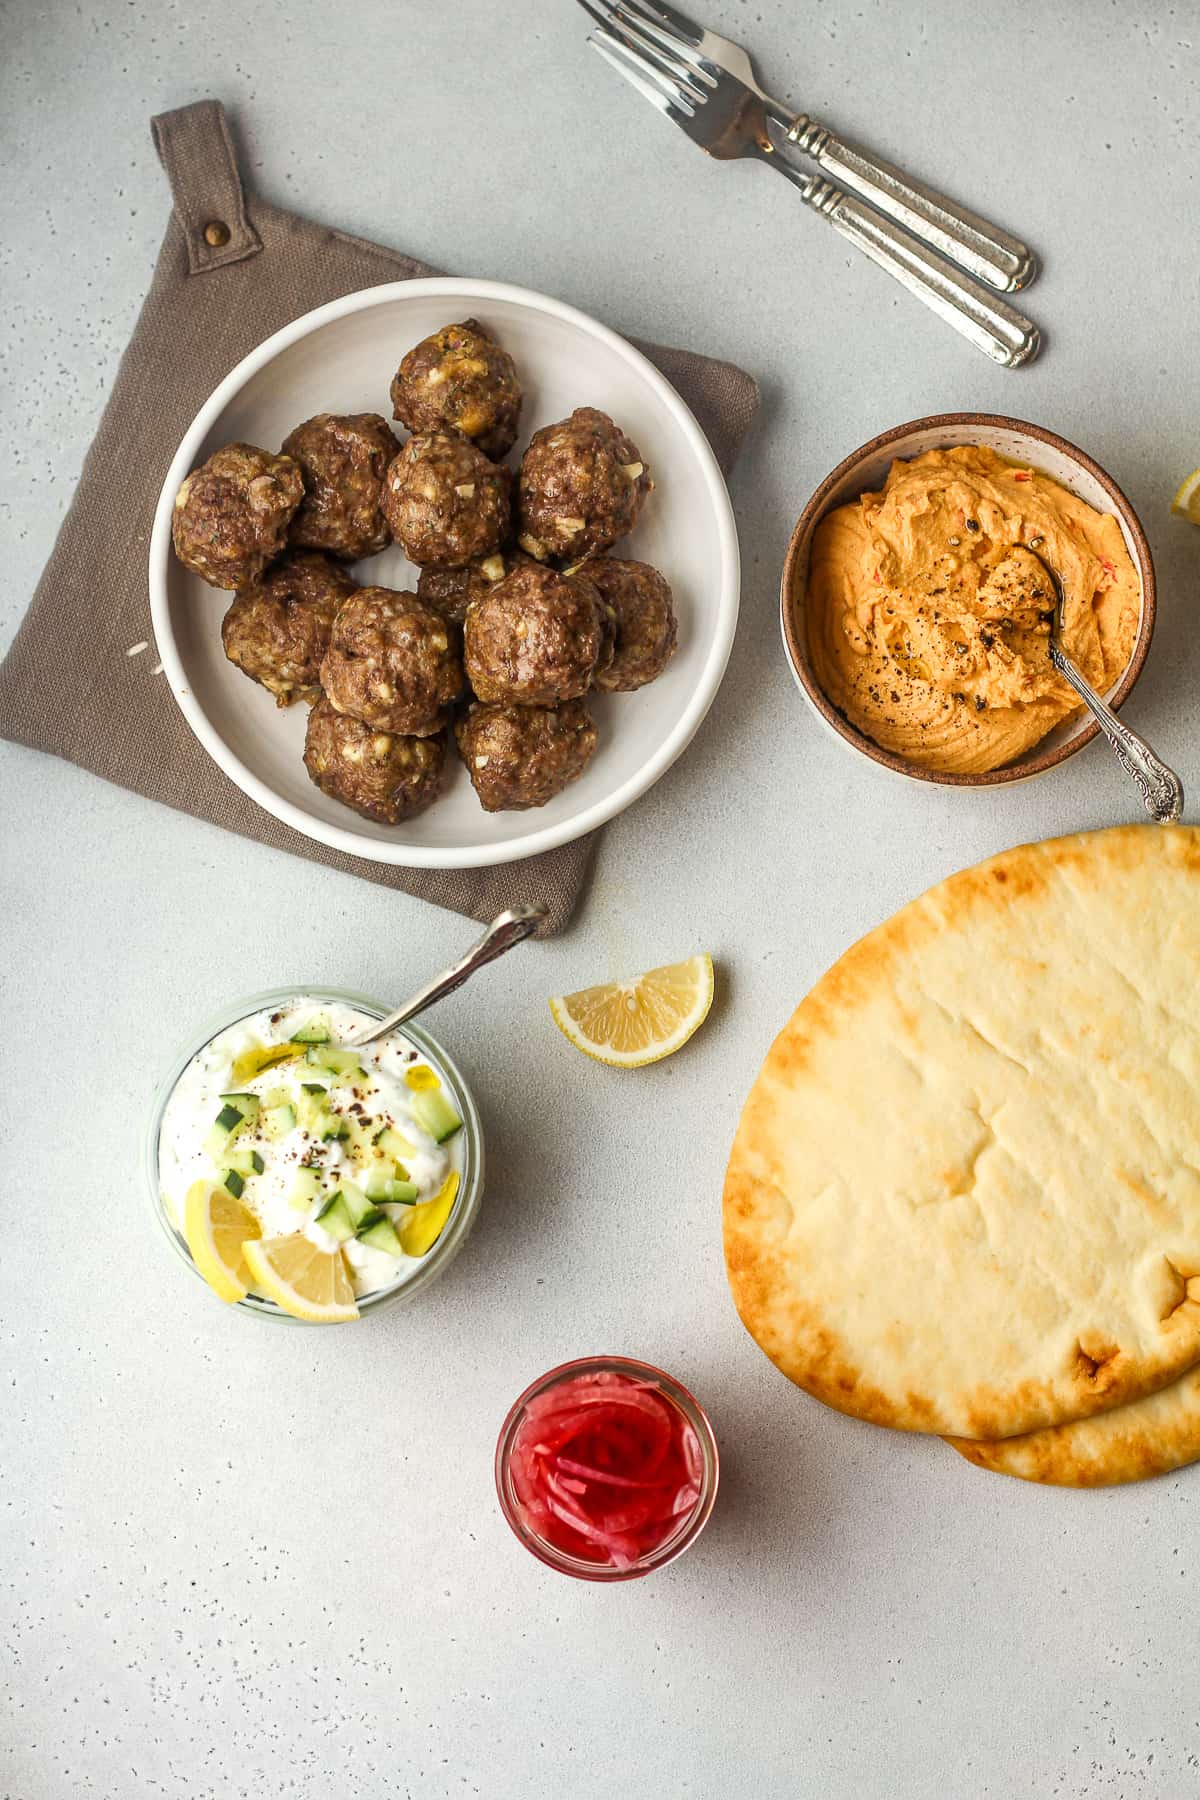 Overhead view of a bowl of meatballs, naan bread, and bowls of hummus and tzatziki sauce and a jar of pickled onions..